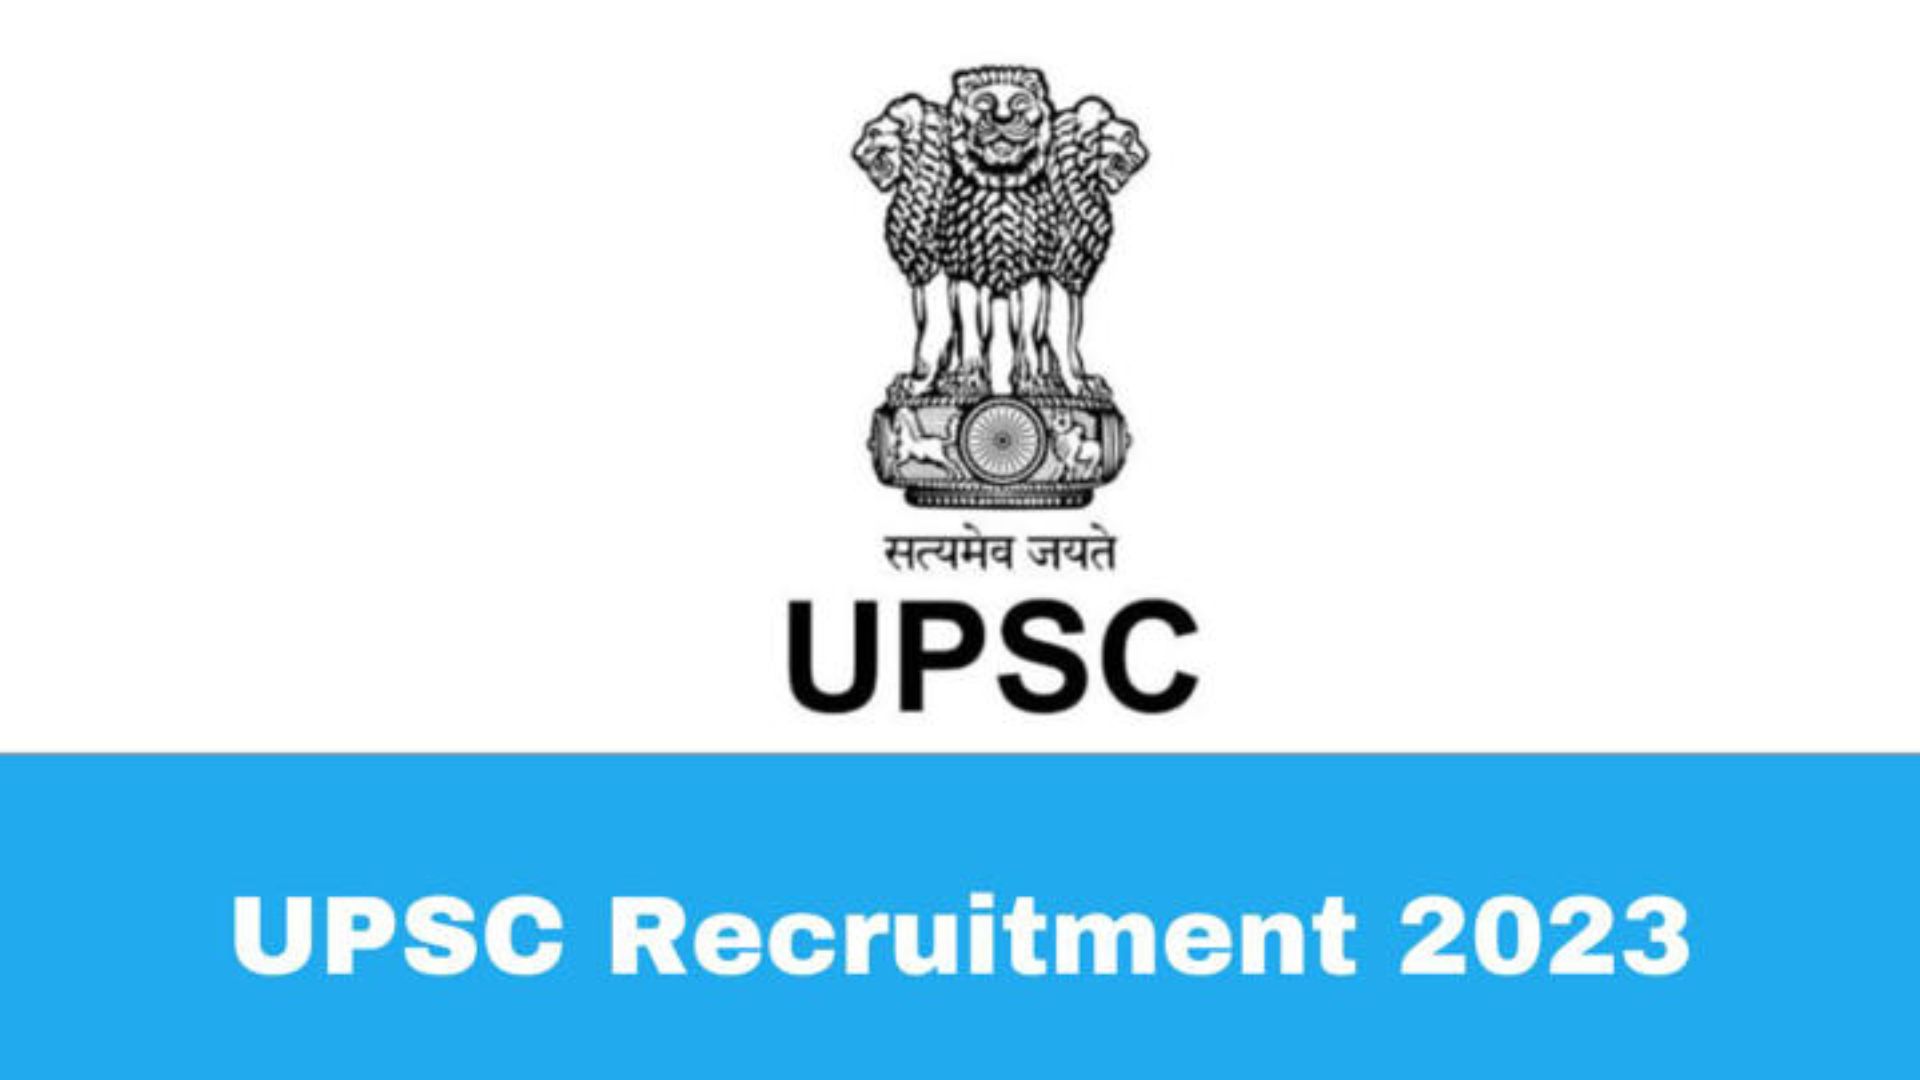 UPSC Recruitment 2023 Apply for 46 Assistant Director and Other Job Openings at upsc